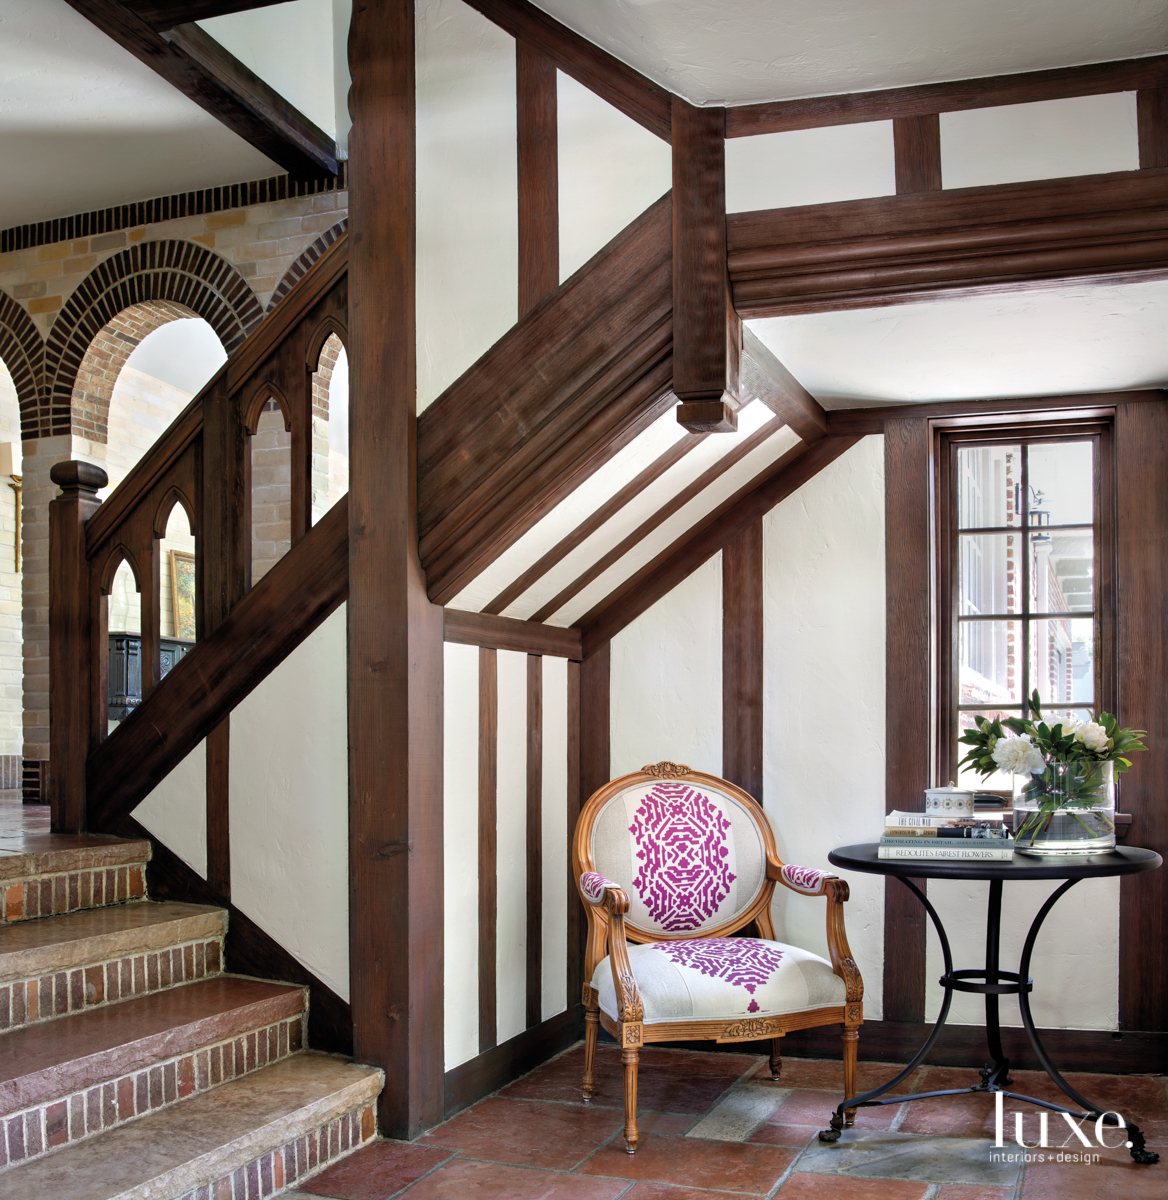 Entry with dark beams and accents. A chair with a hot-pink upholstery detail sits by a small table.